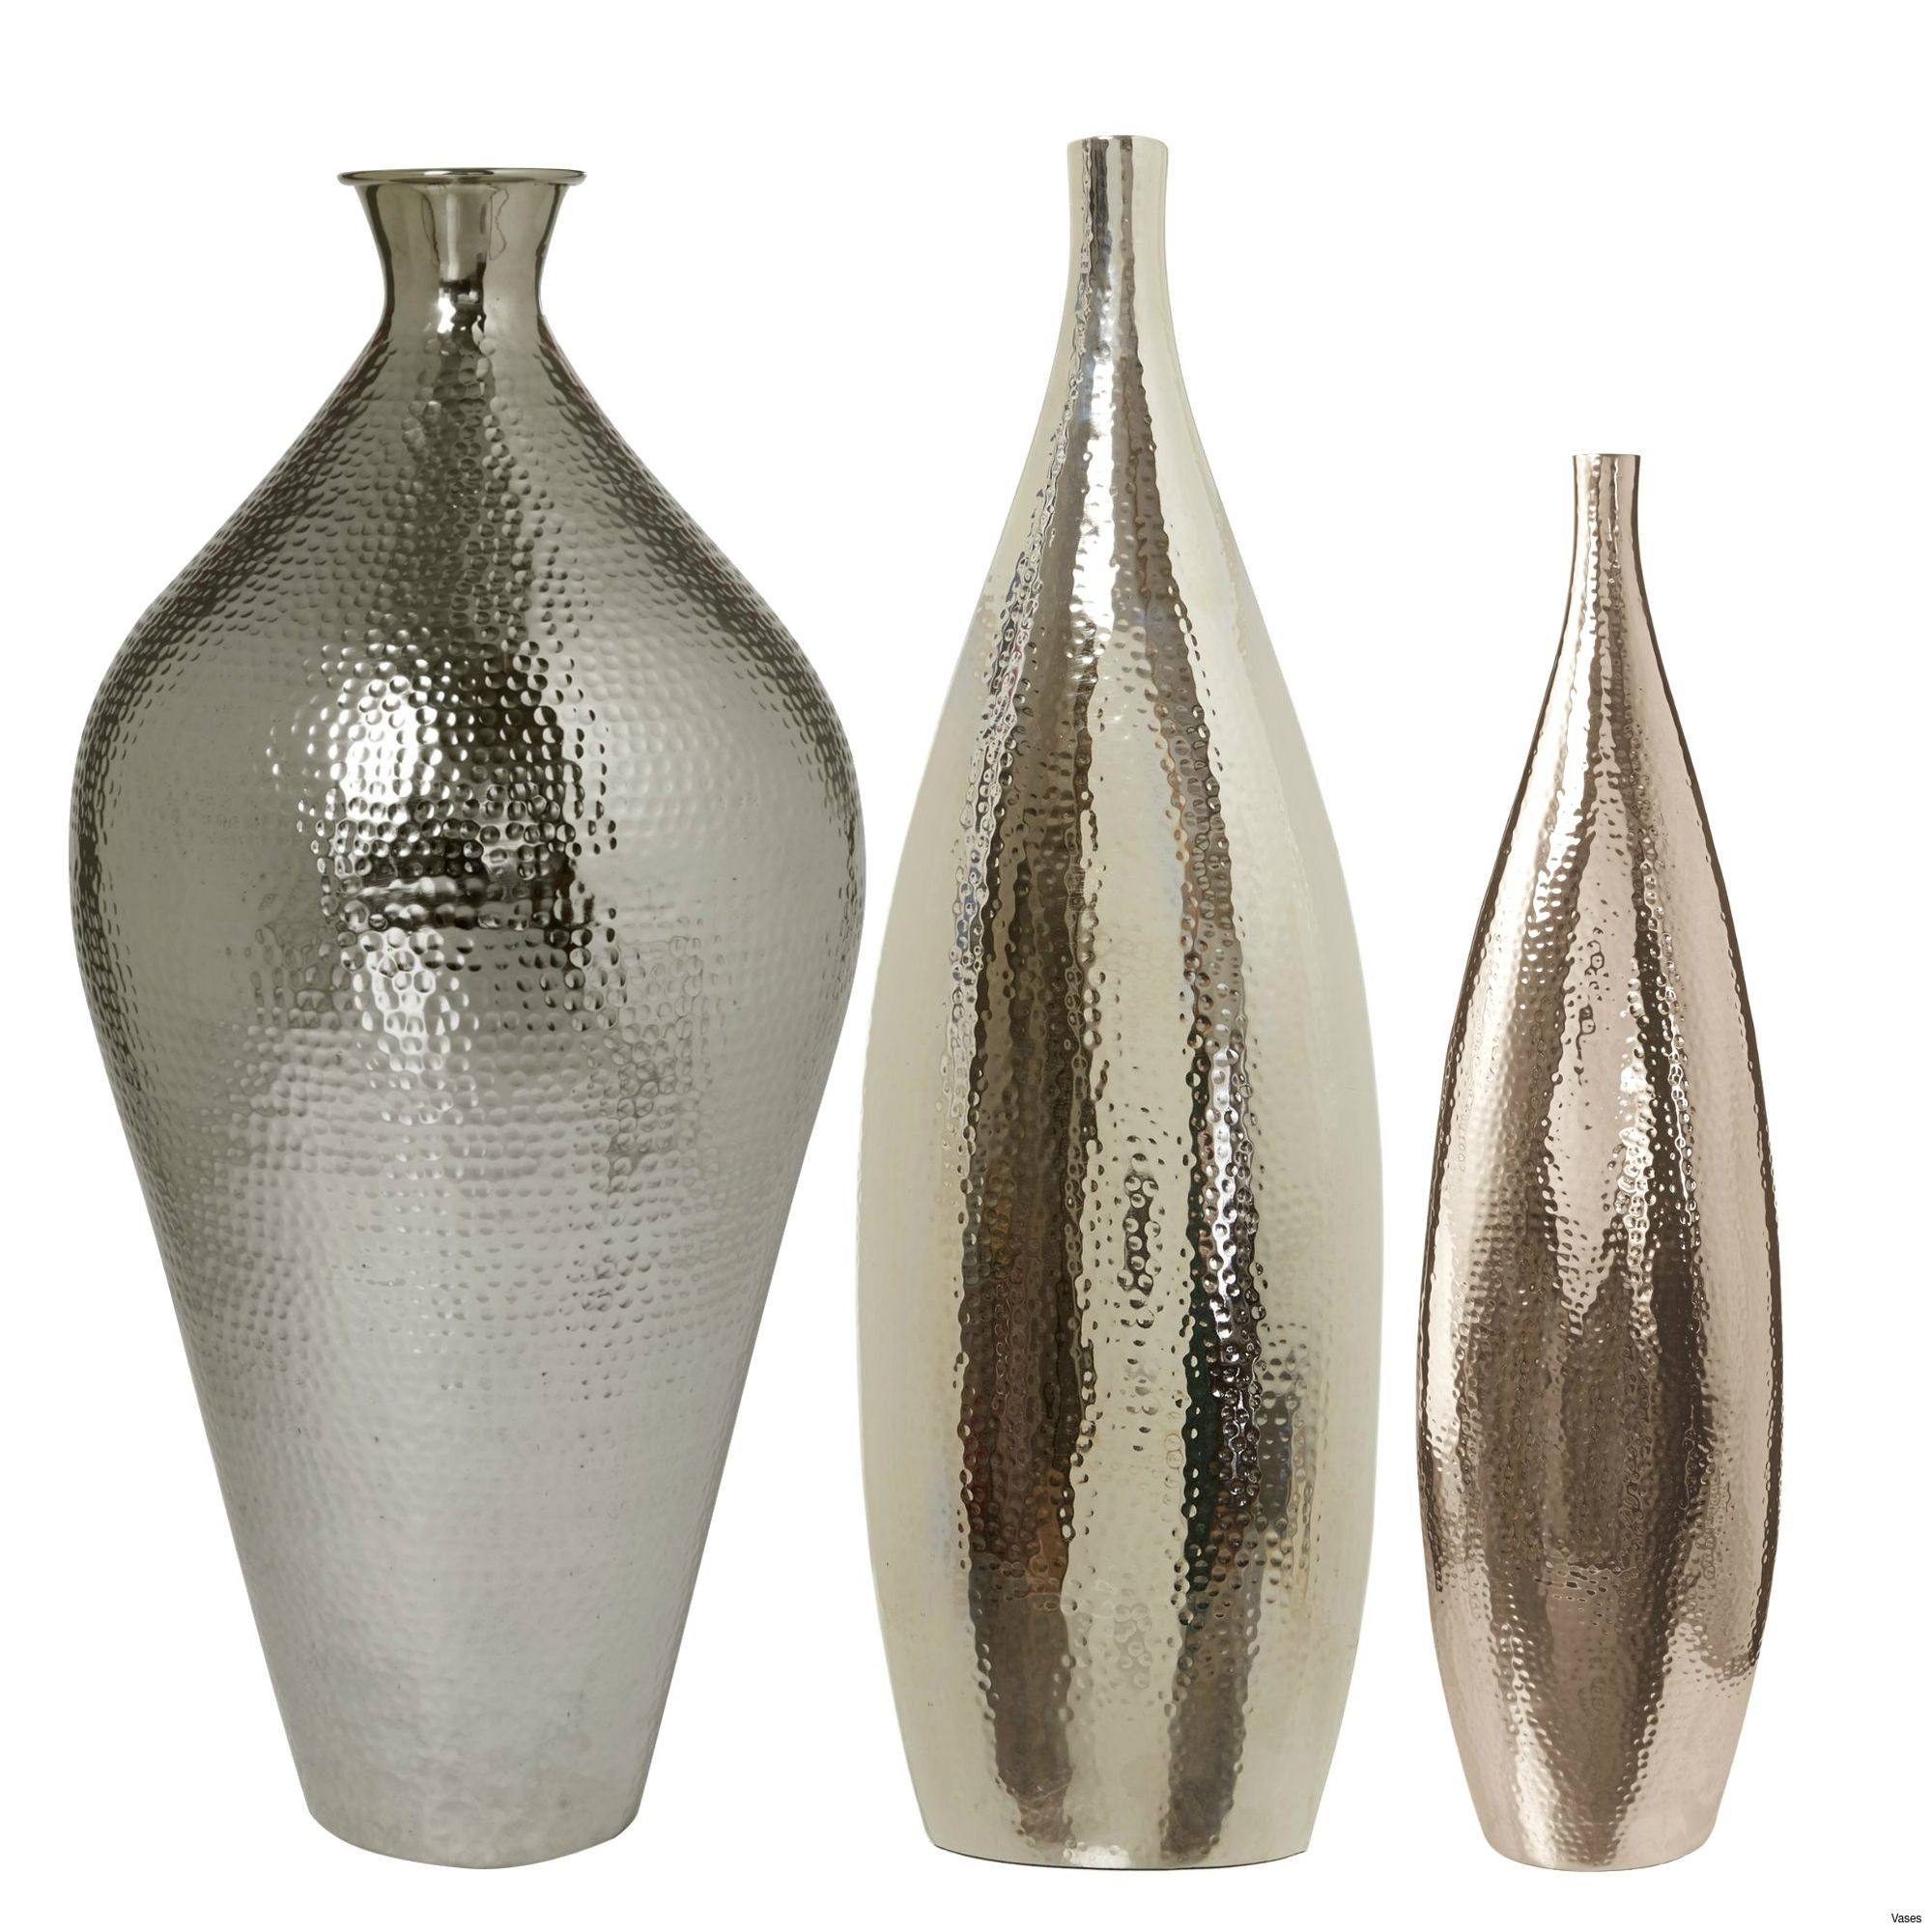 11 Nice Metallic Mosaic Terracotta Floor Vase 2024 free download metallic mosaic terracotta floor vase of 44 gold and silver vase the weekly world with regard to 44 gold and silver vase